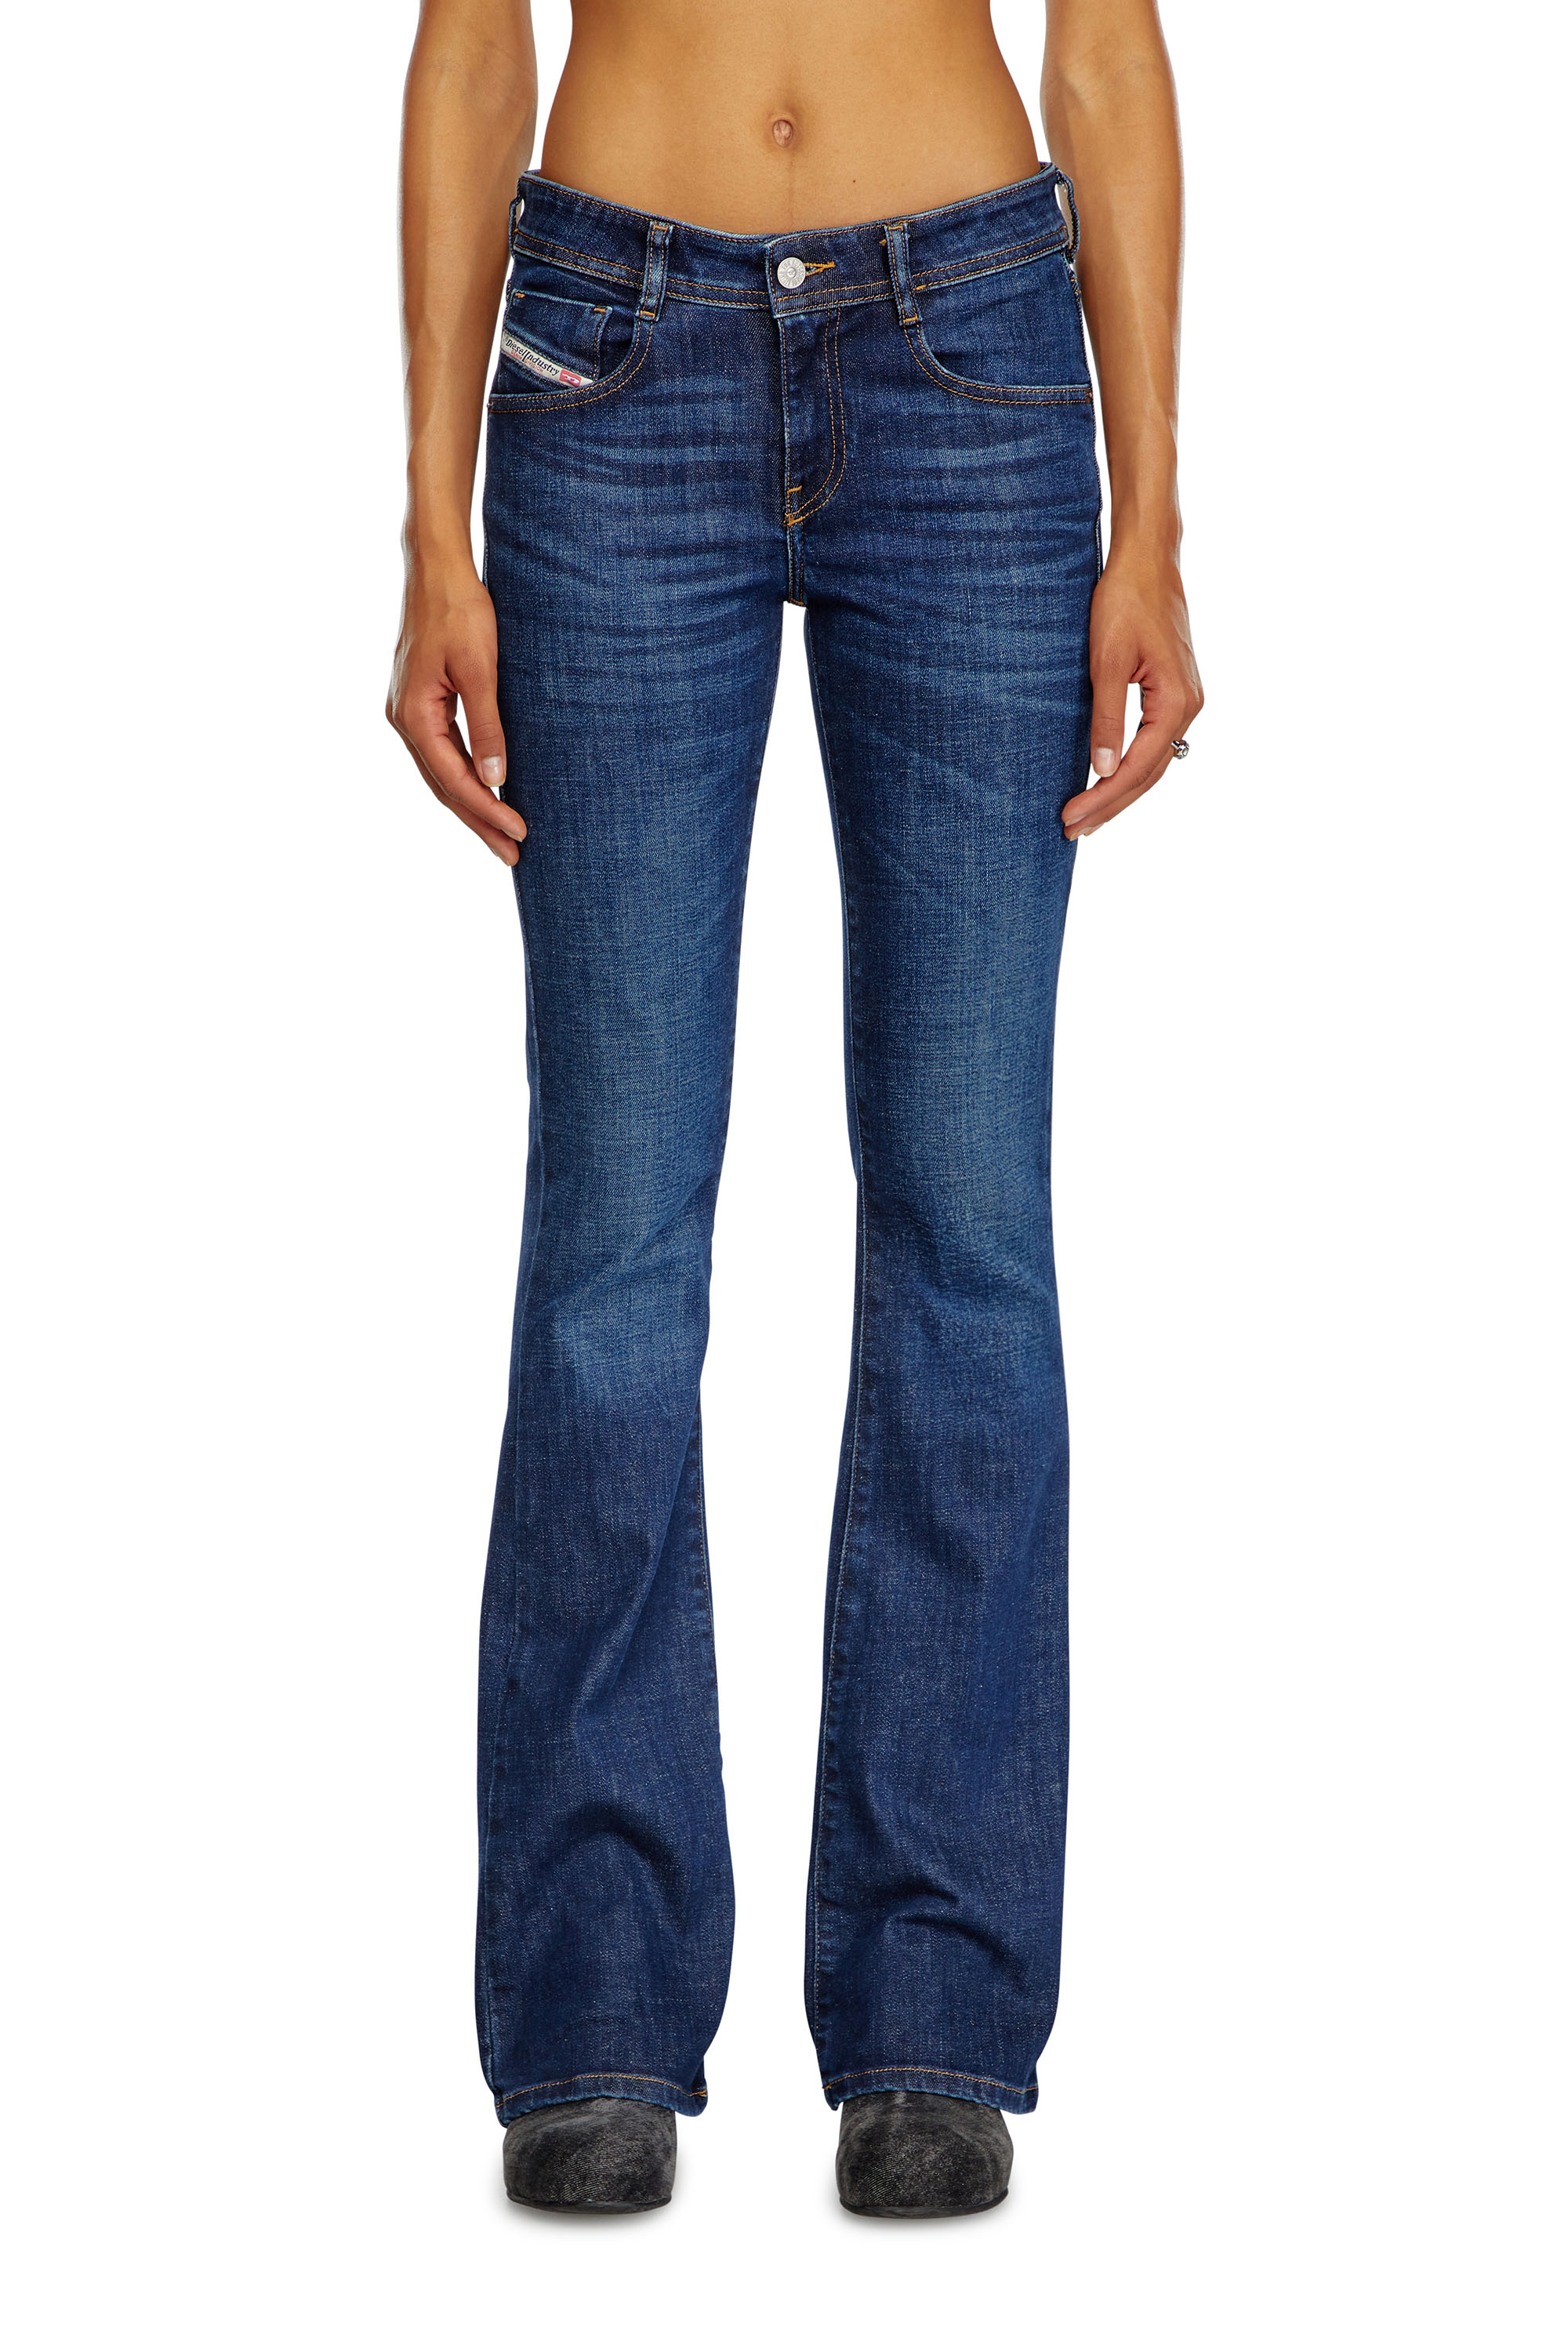 Bootcut and Flare Jeans 1969 D-Ebbey 09B90, Dark Blue - Jeans